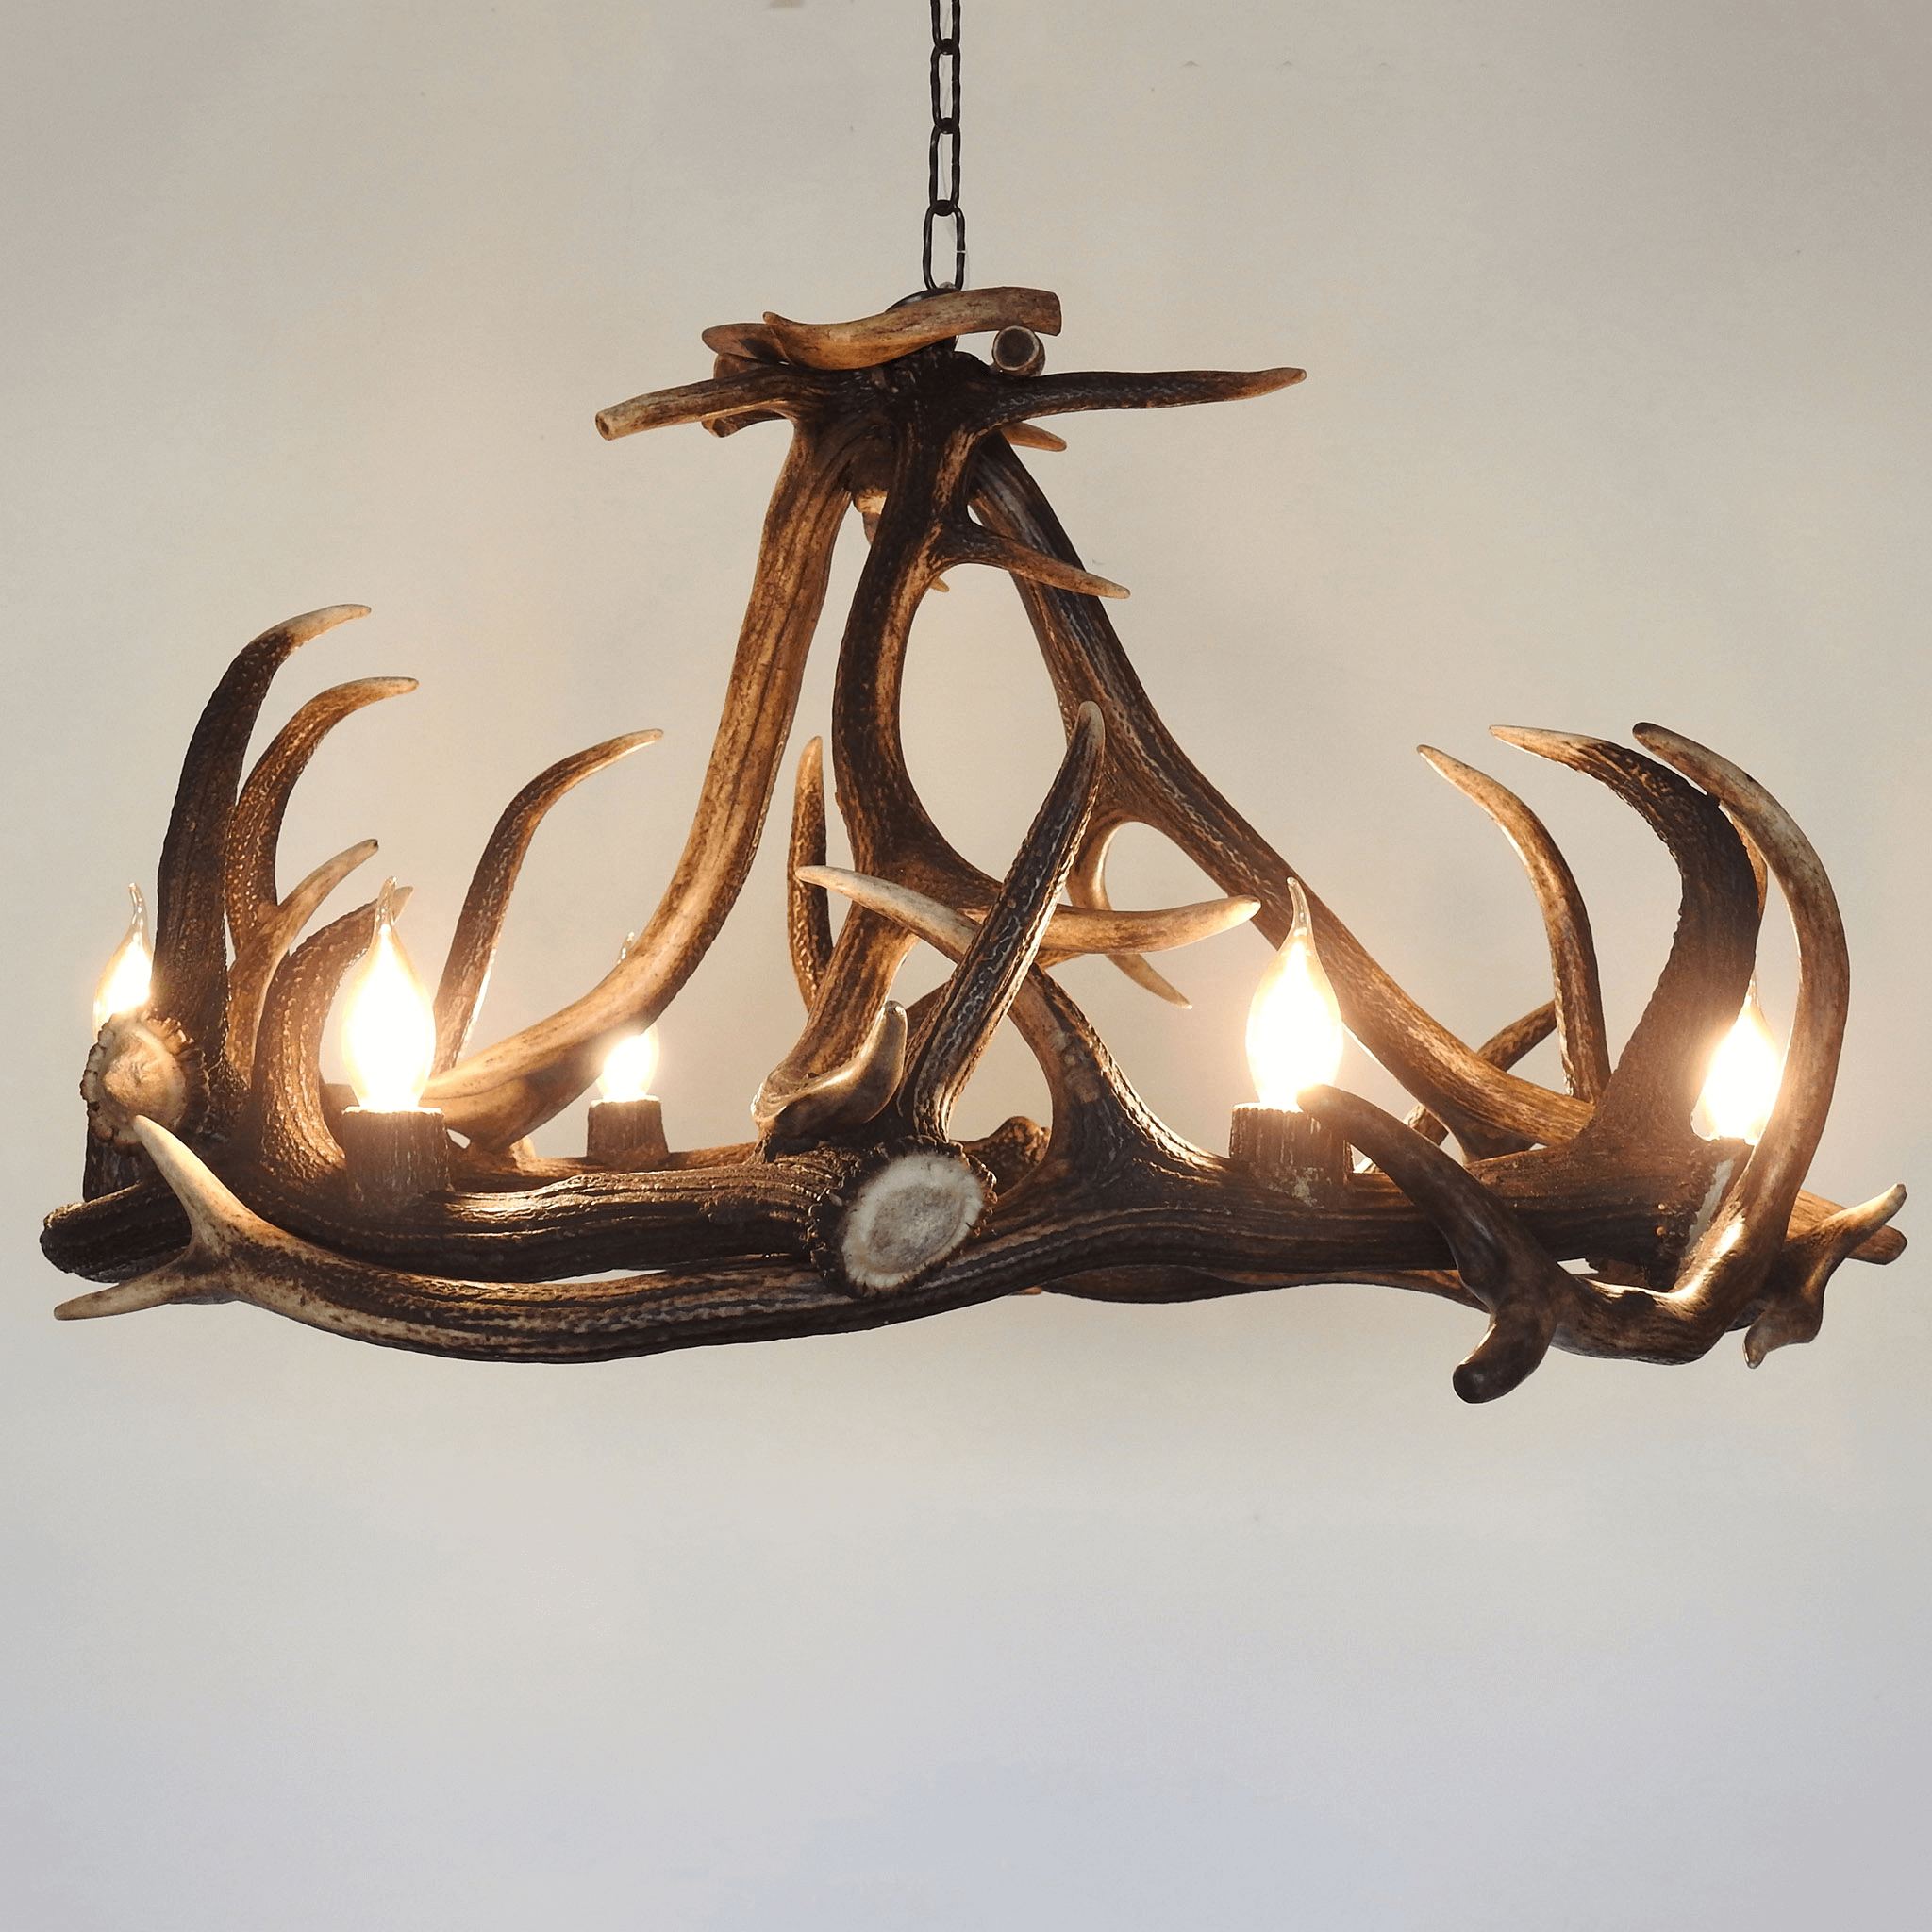 Real antler chandelier in rustic style